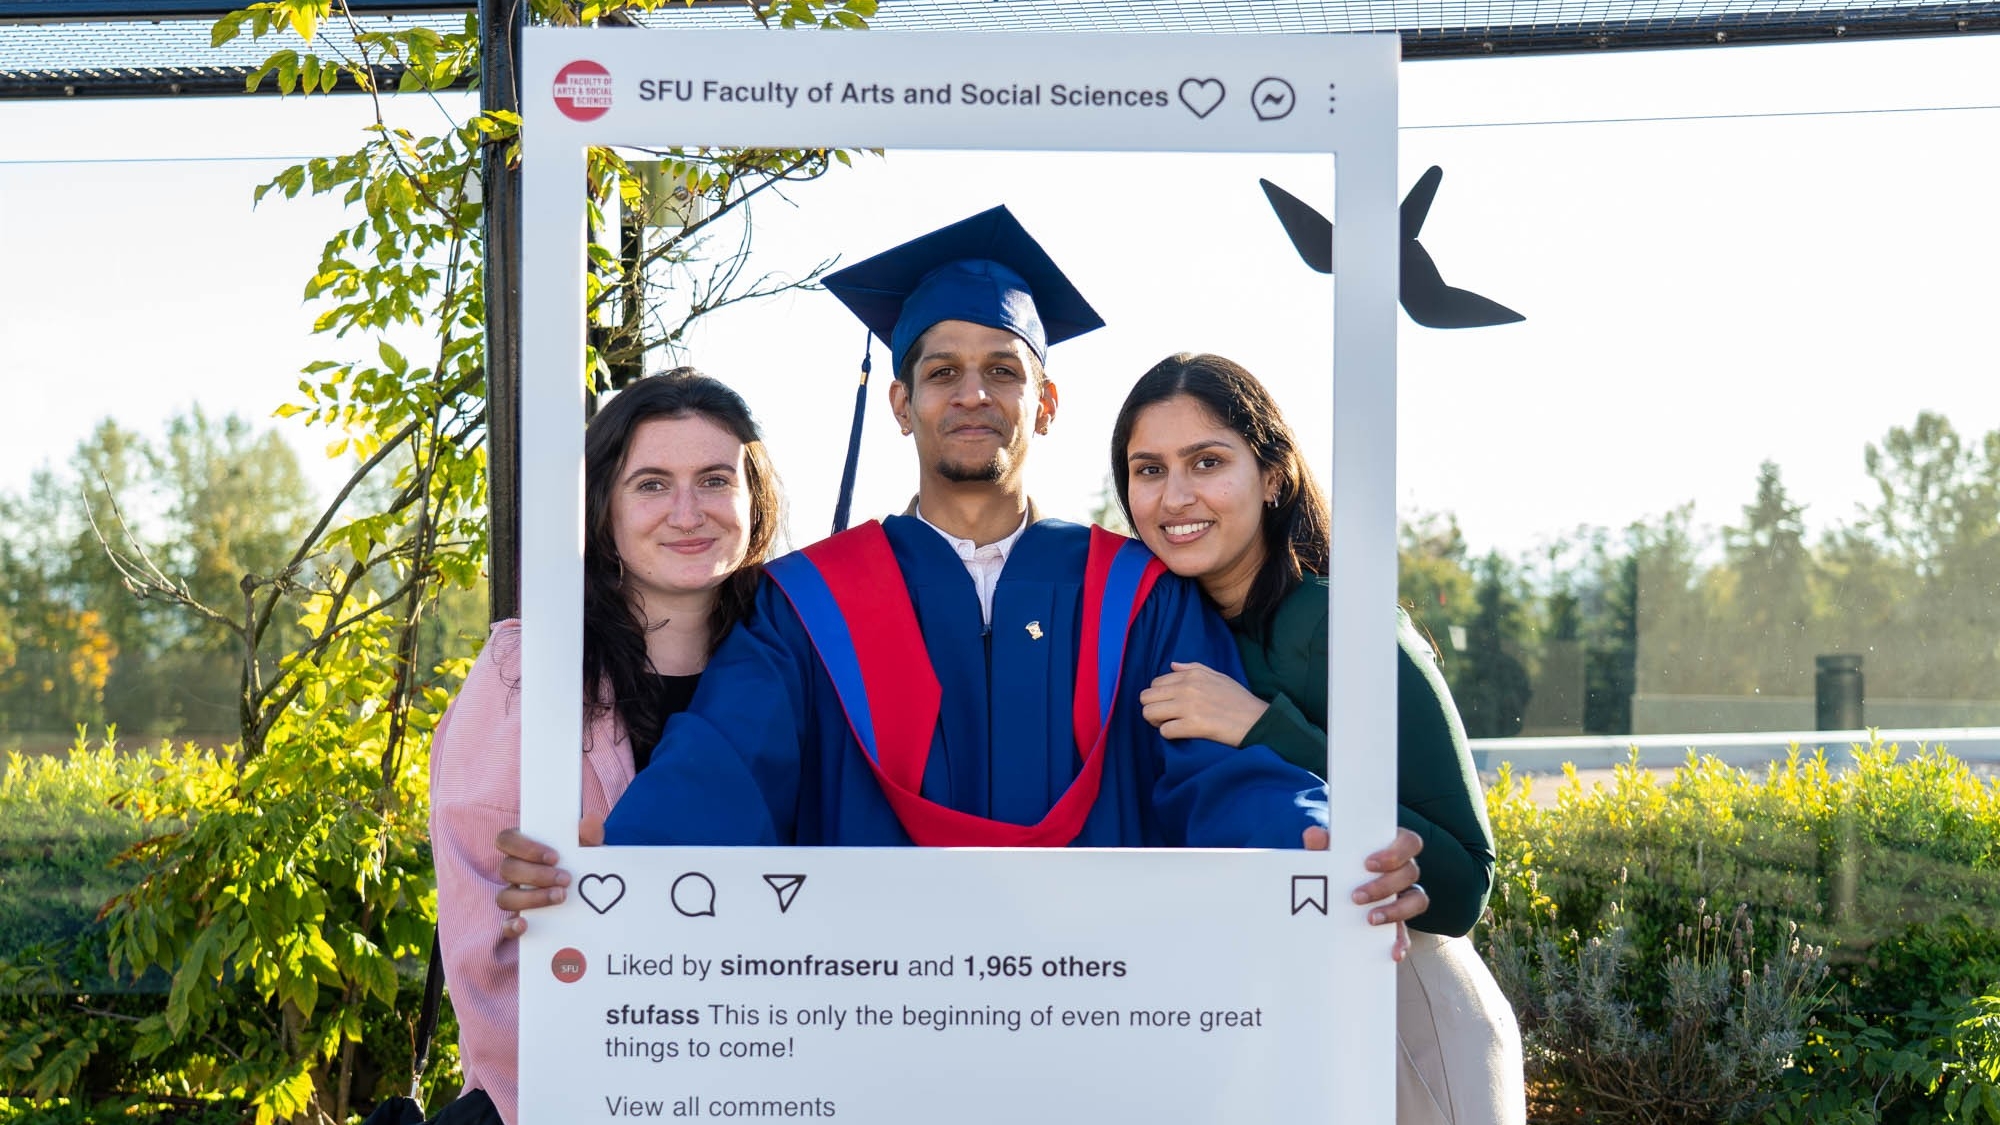 A FASS graduate in blue and red regalia poses outside with an SFU FASS Instagram frame with their two guests.